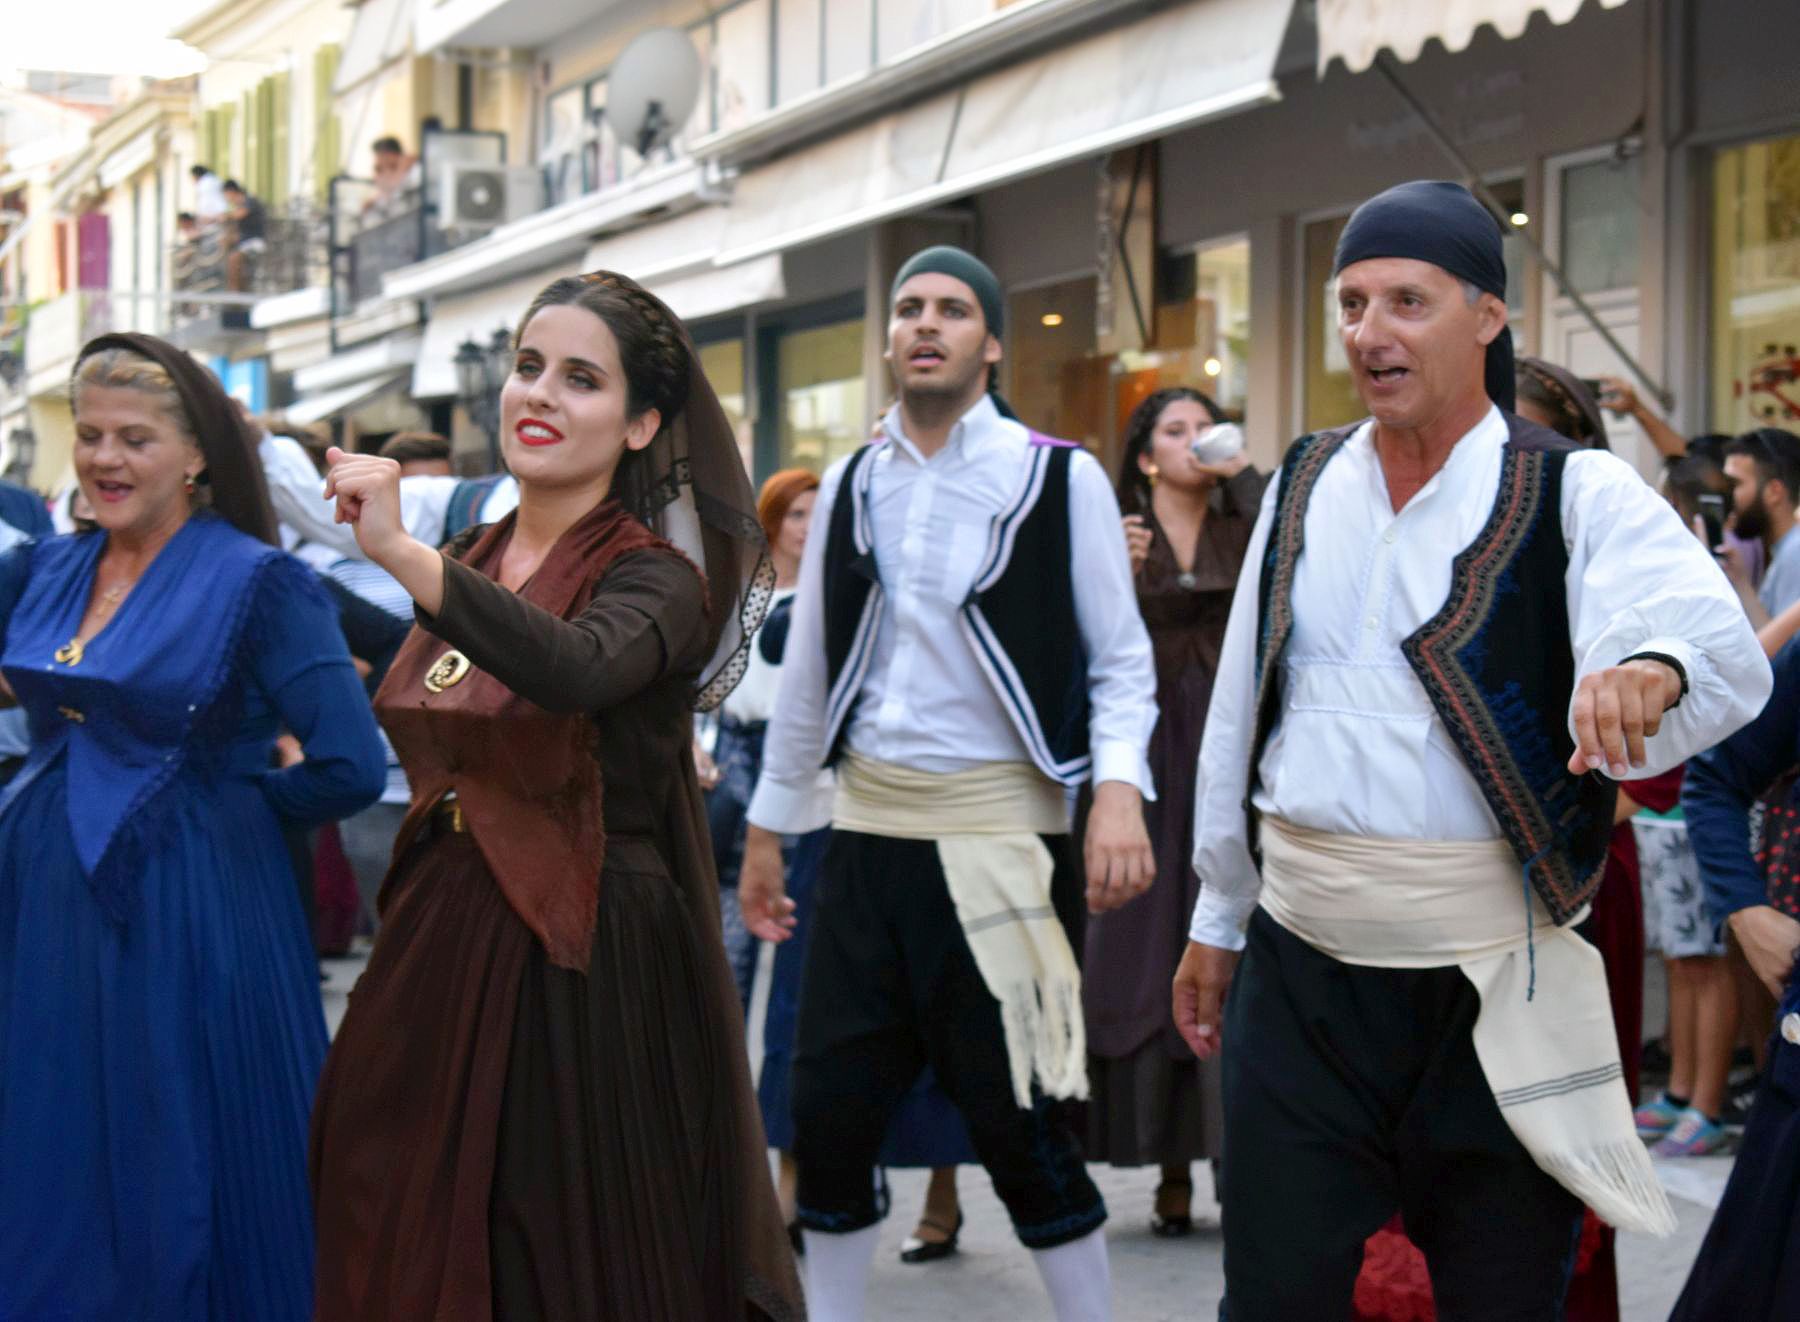 Dancers wearing traditional costumes | Lefkada Slow Guide